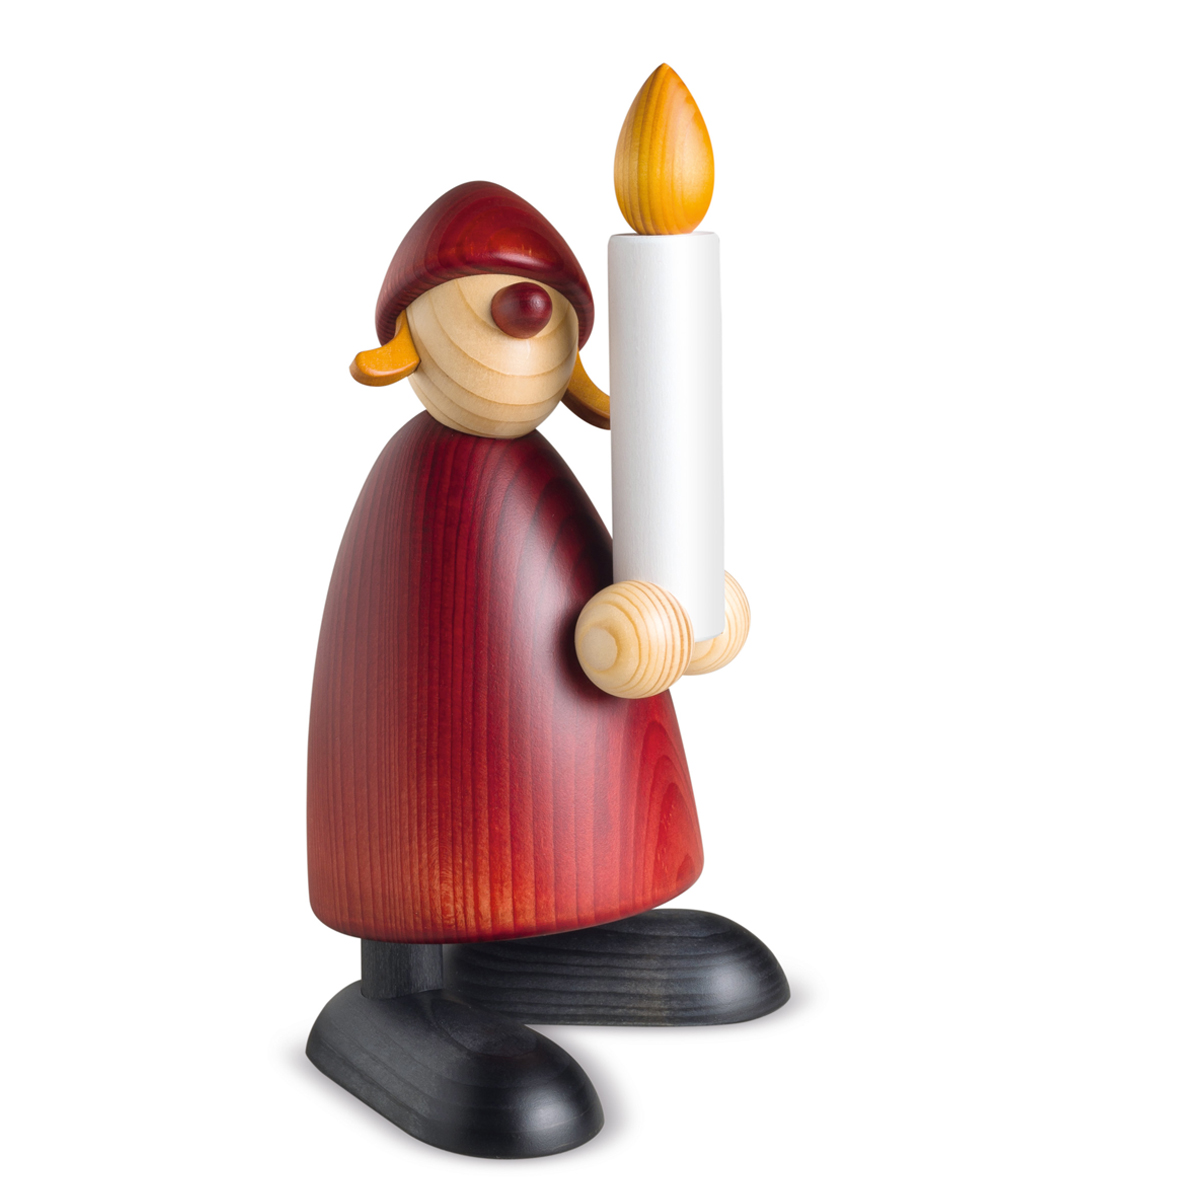 Mrs Claus holding a candle, large